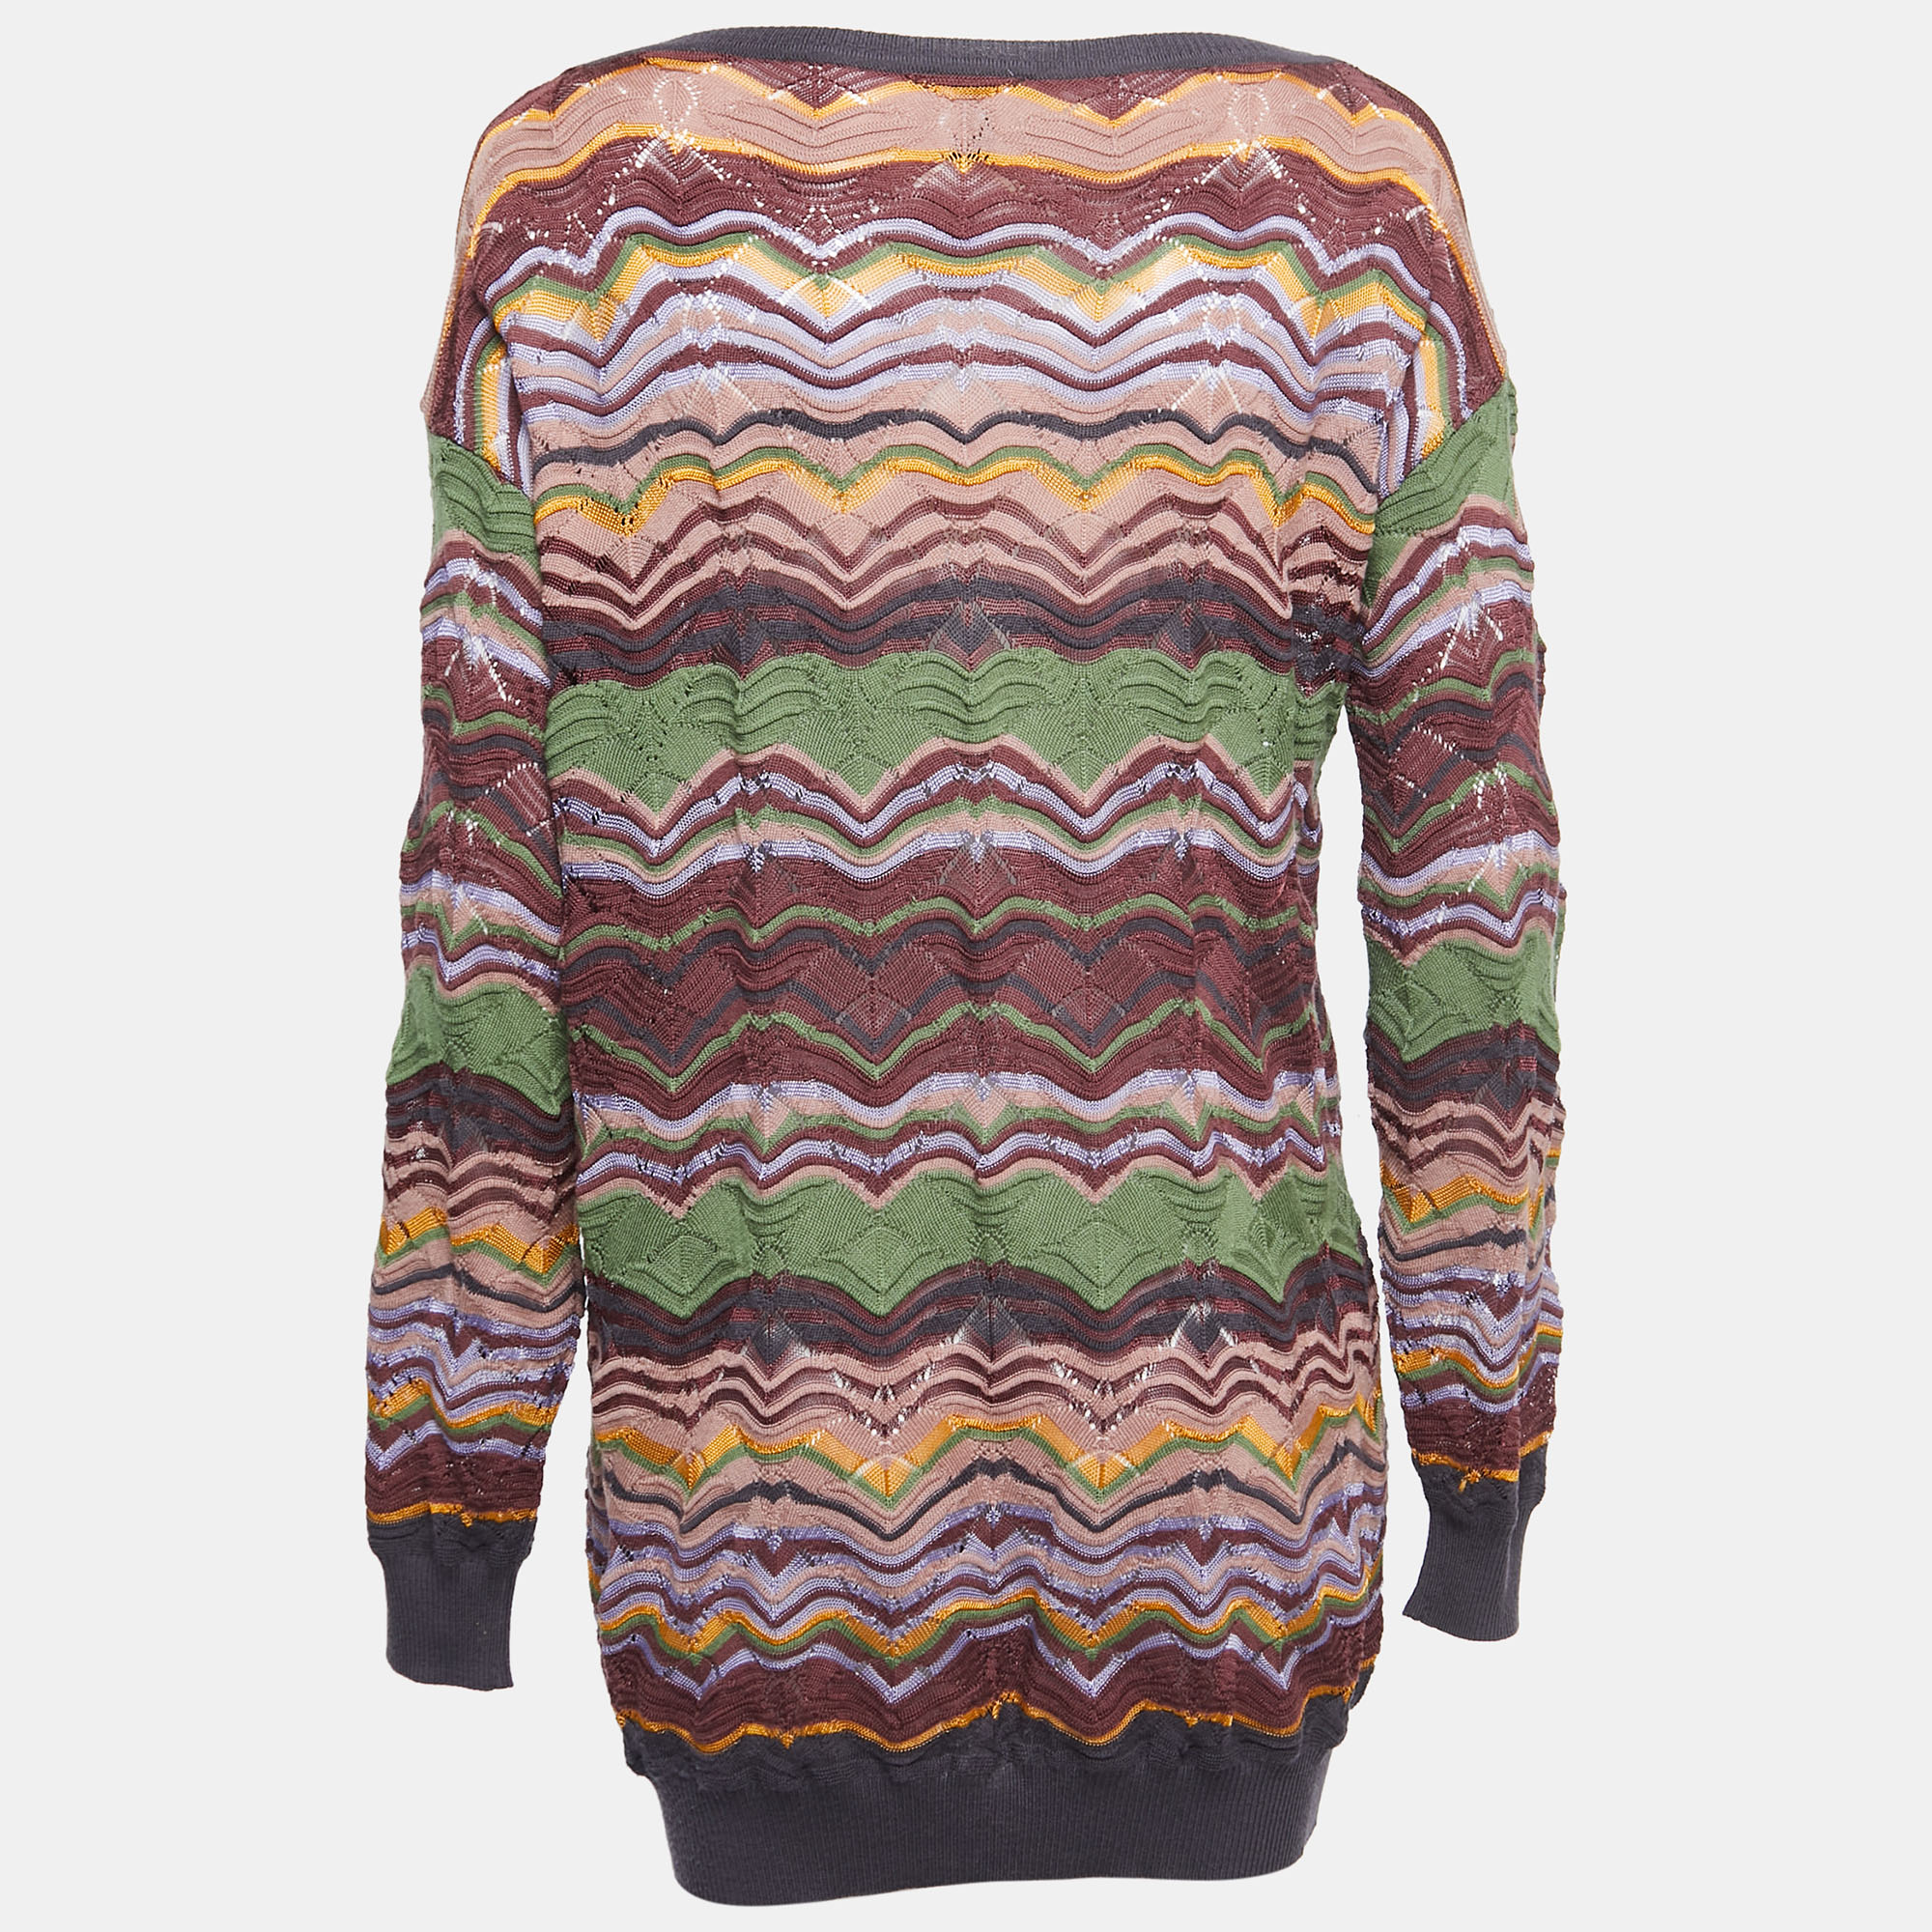 

M Missoni Multicolor Patterned Perforated Knit Crew Neck Sweater